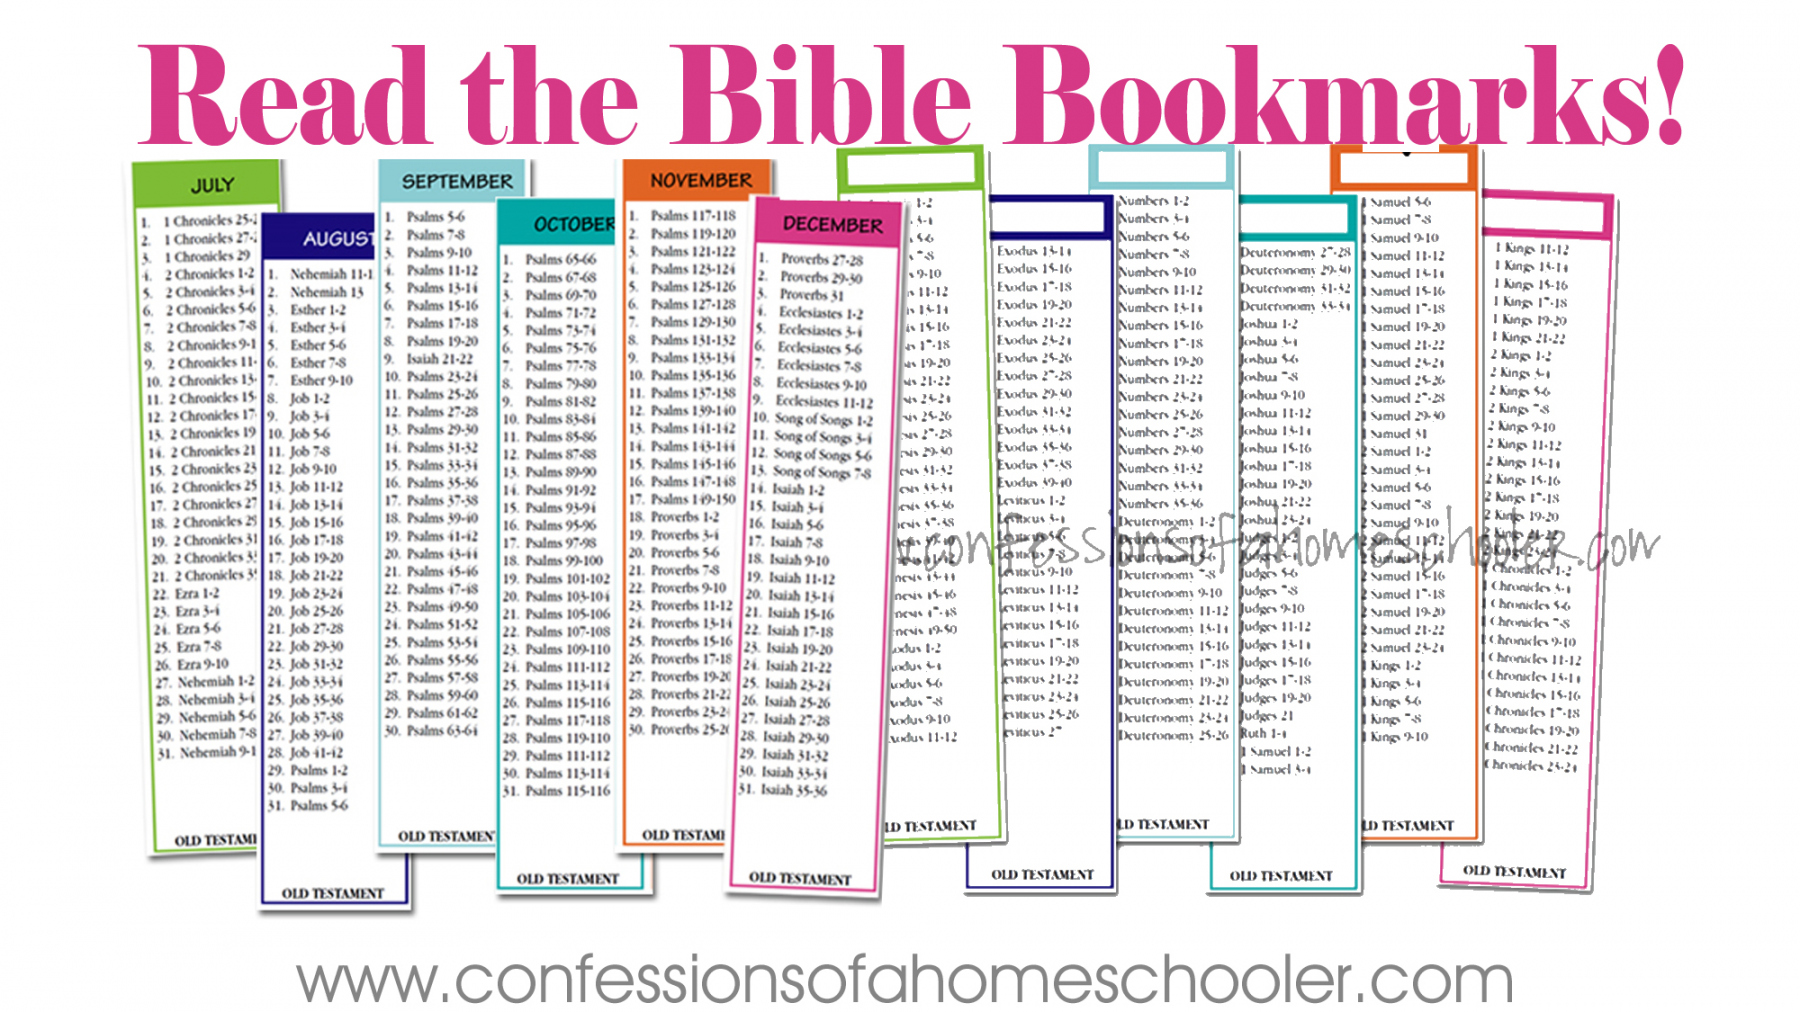 Read the Bible in Two Years Bookmarks - Confessions of a Homeschooler